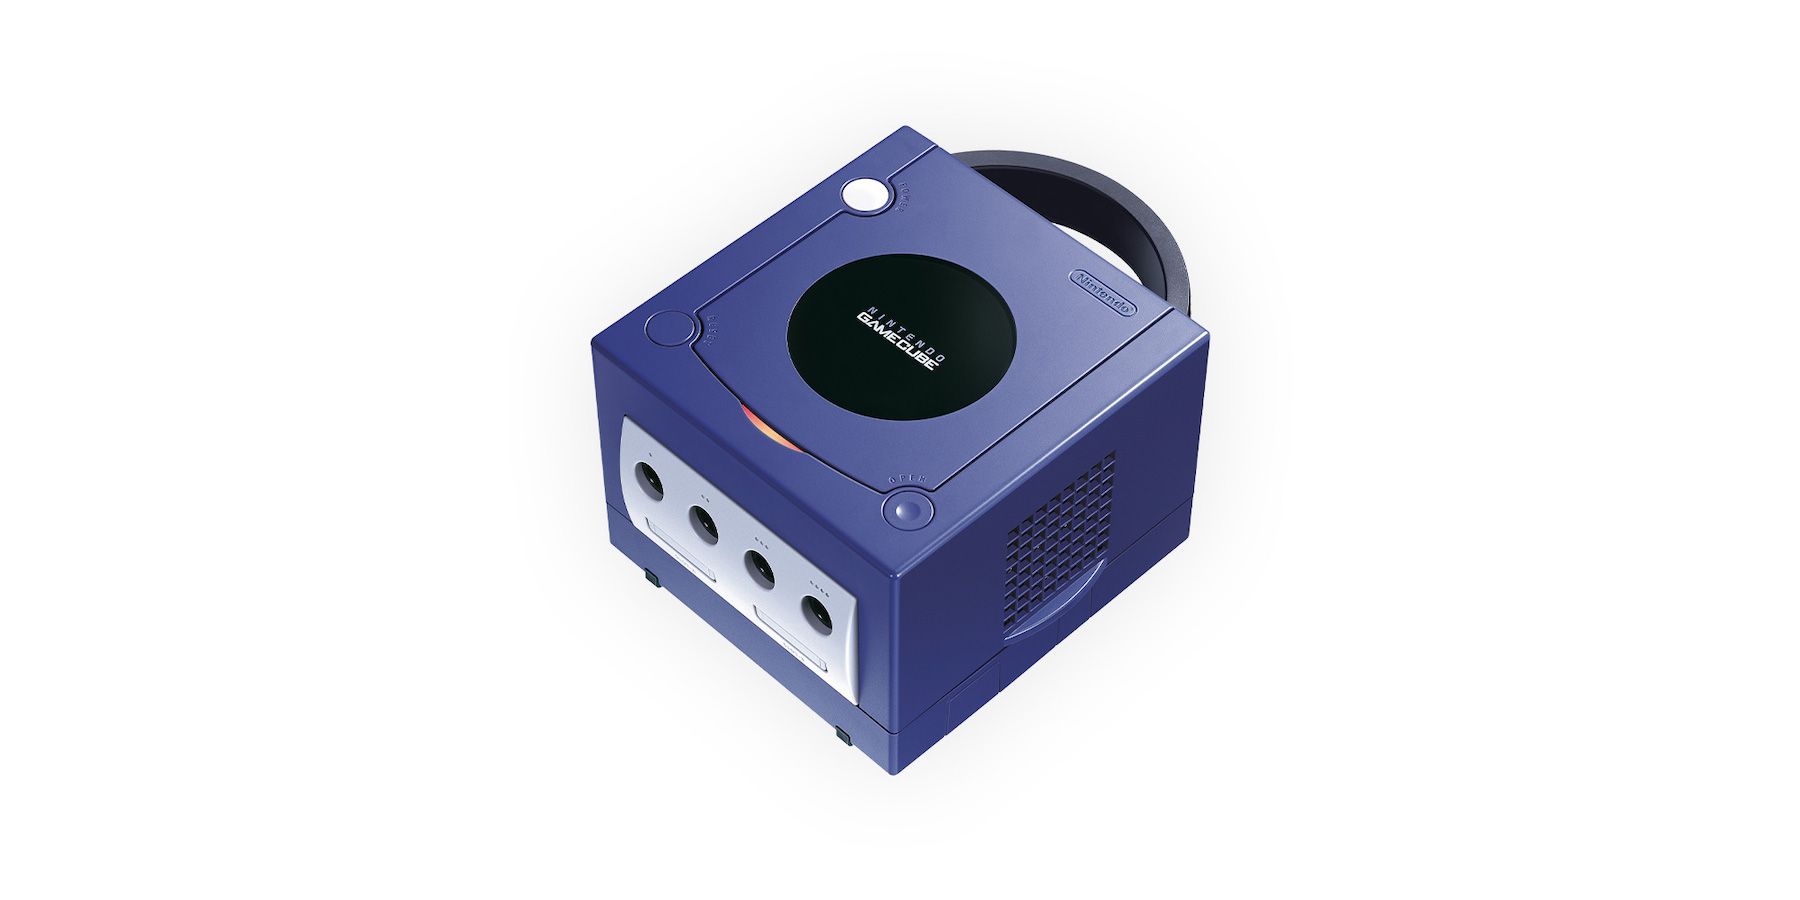 GameCube Fan Makes Unexpected Discovery